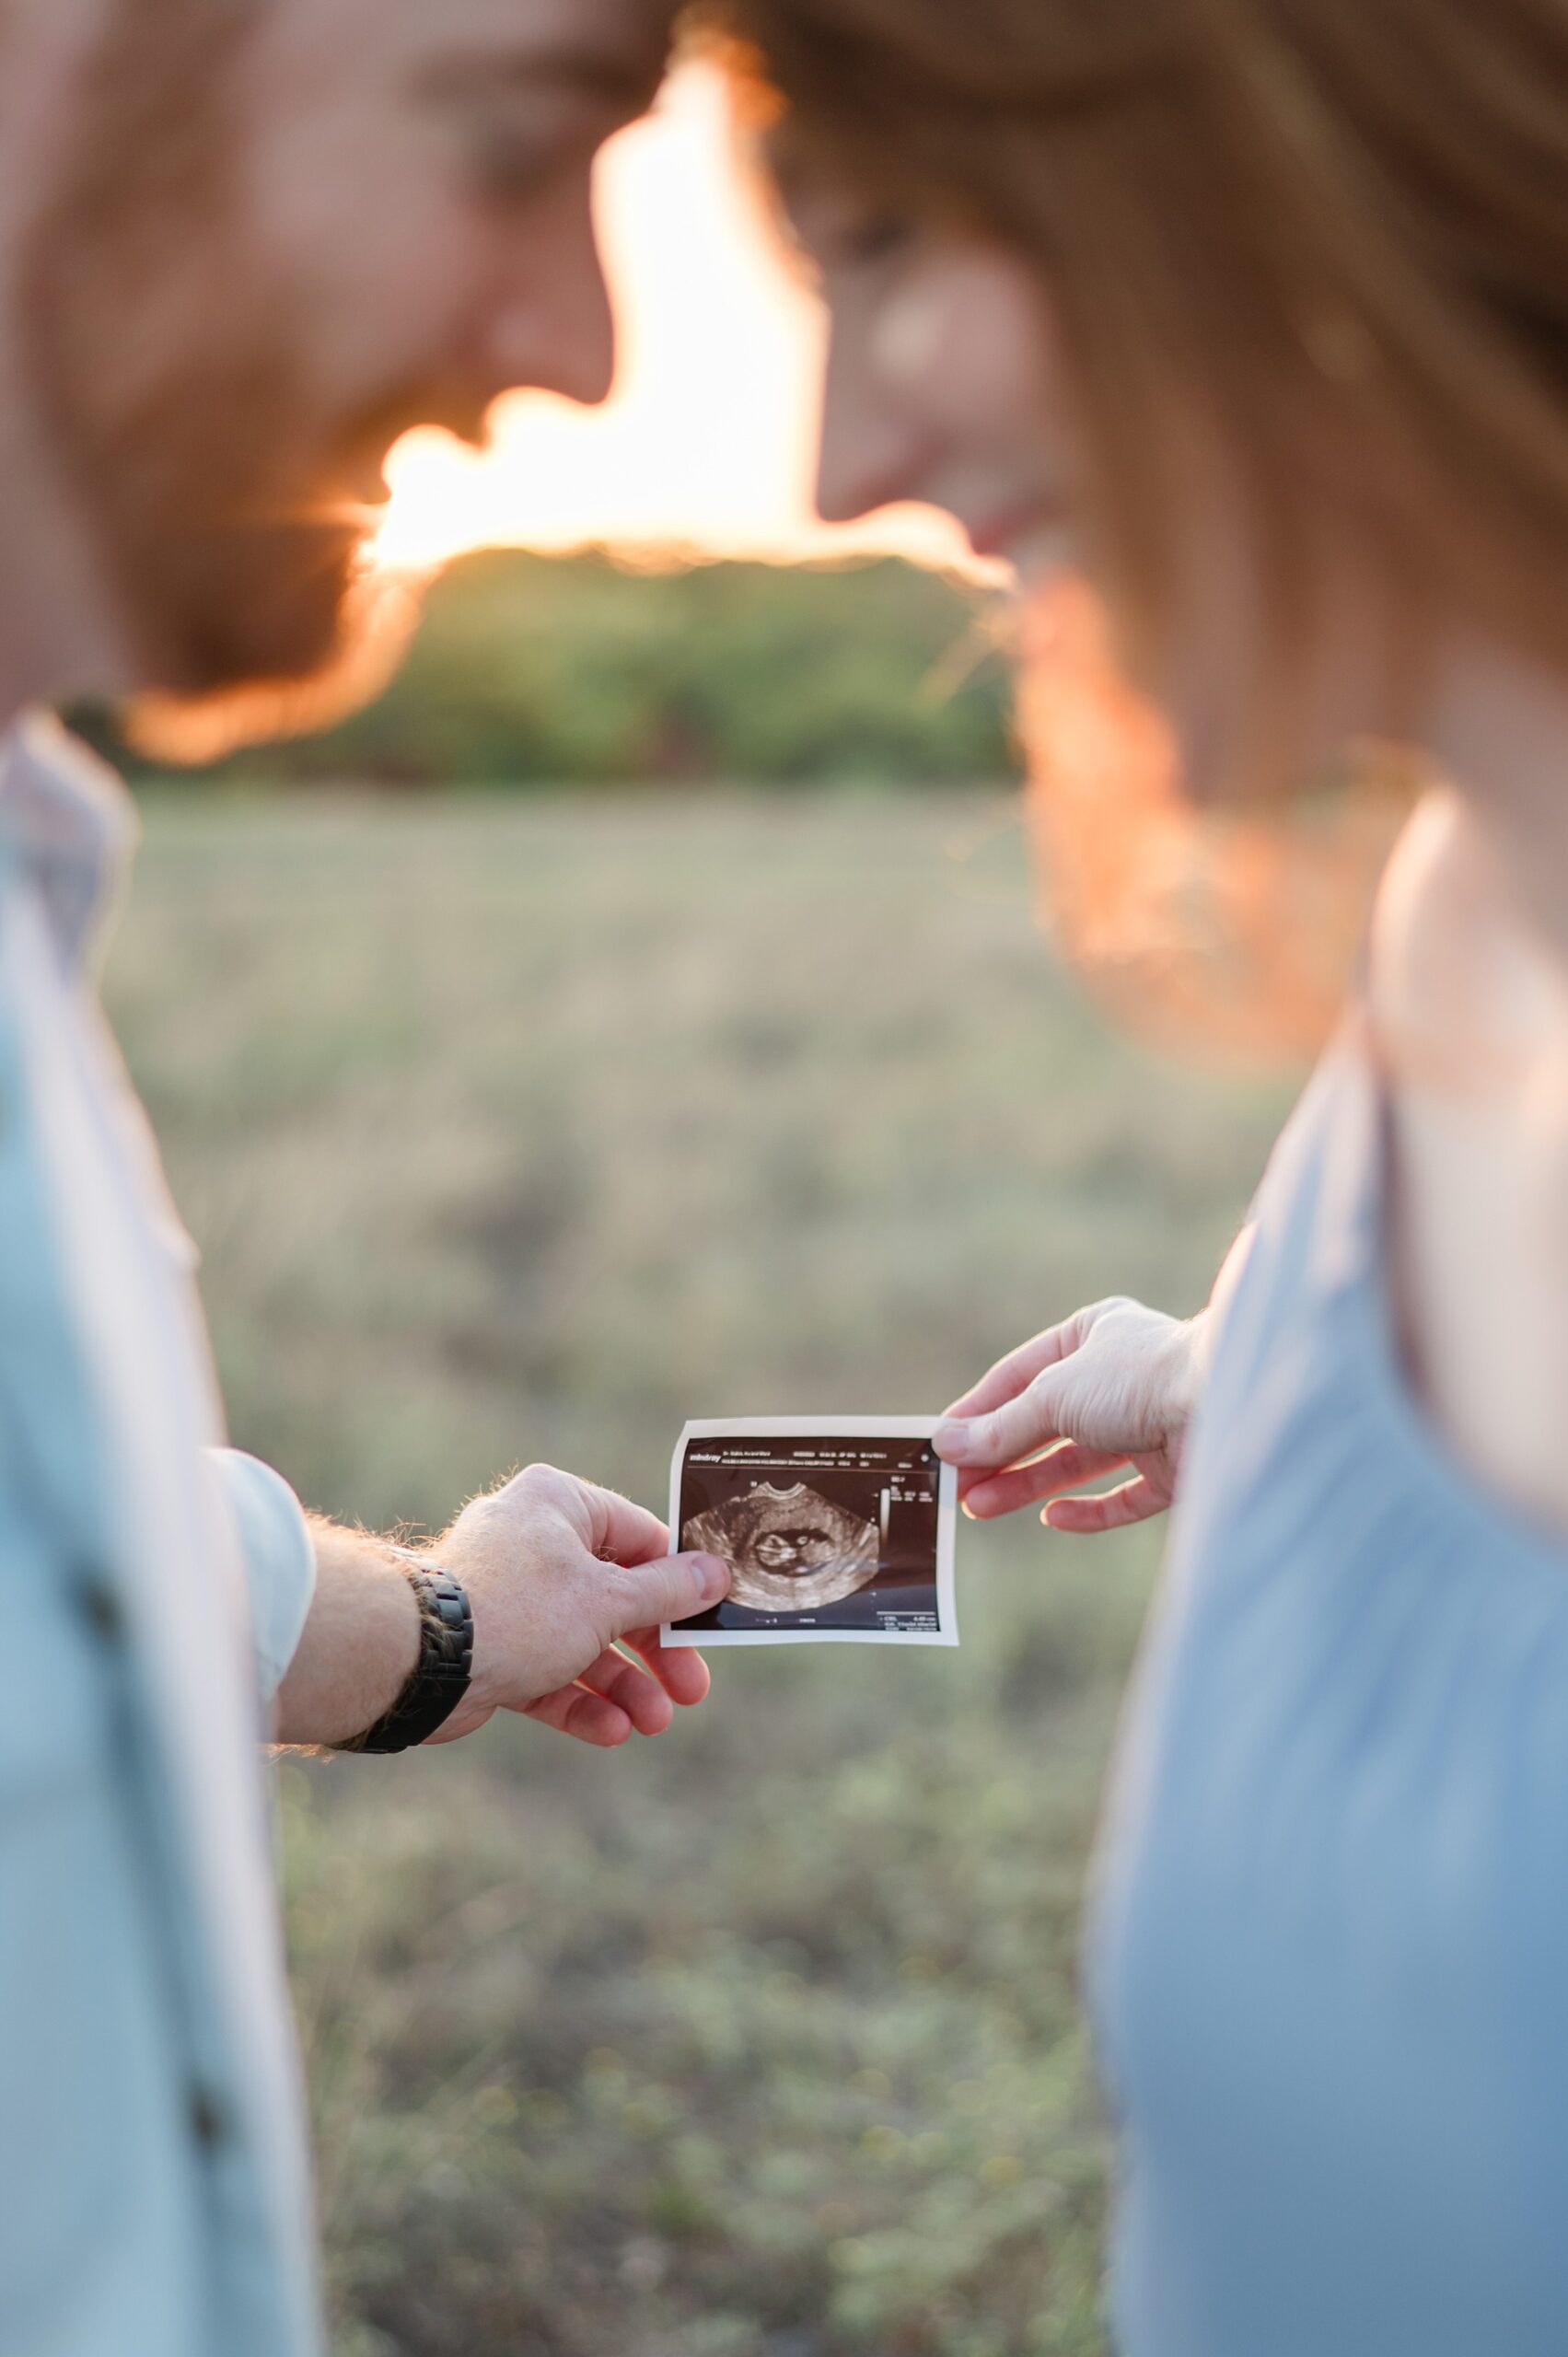 parents to be holding an ultrasound photo photographed by Lindsey Dutton Photography, a Dallas maternity photographer
